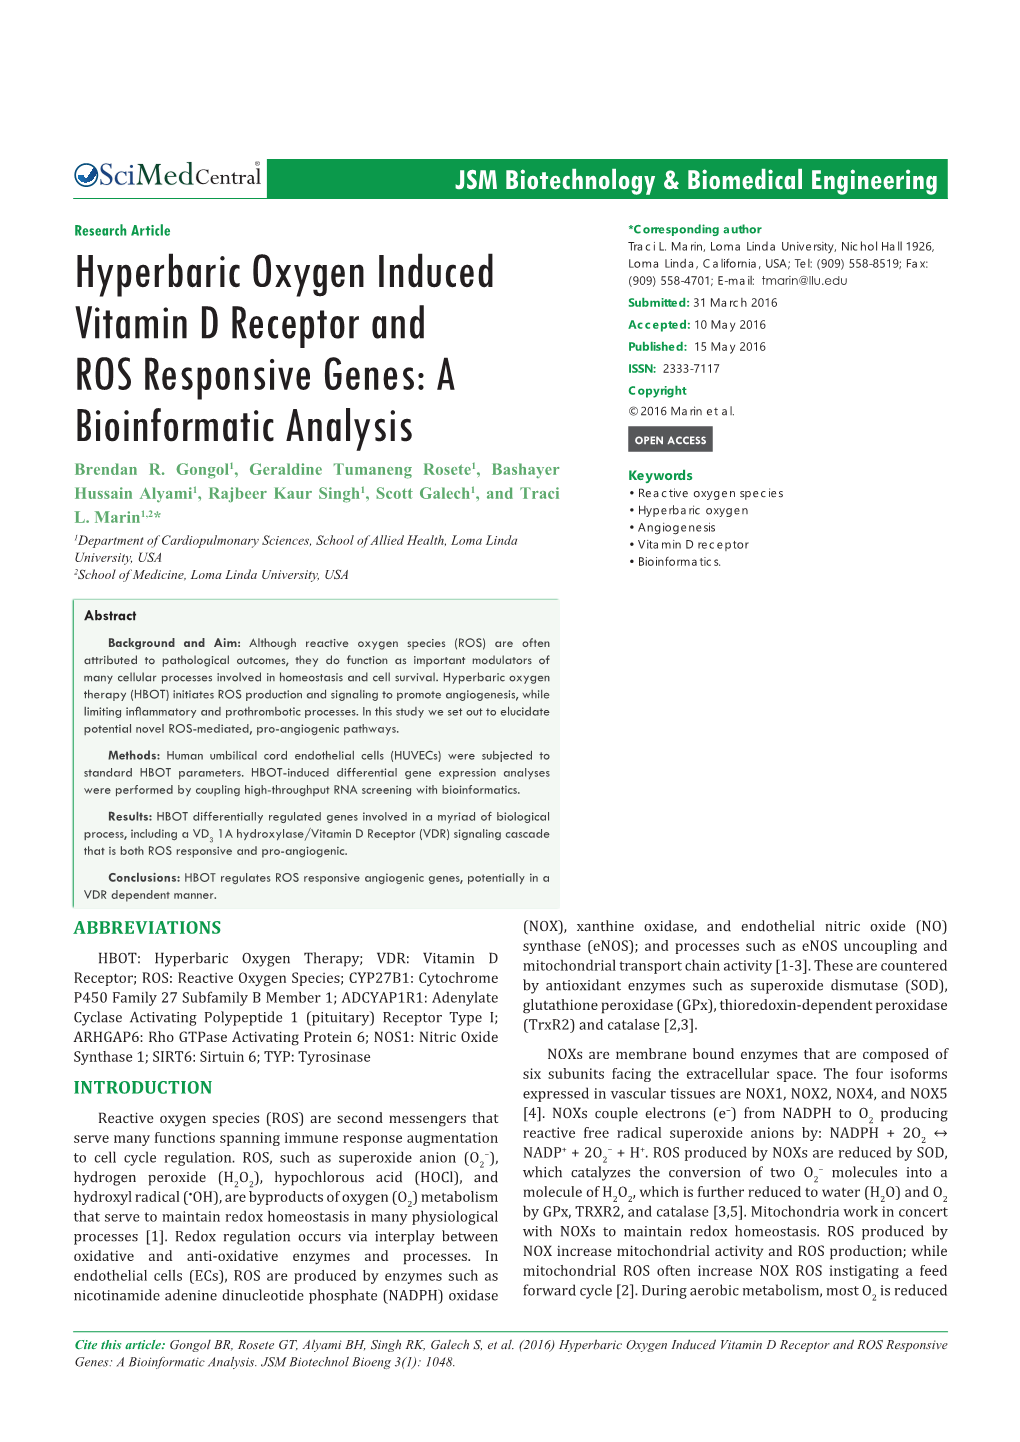 Hyperbaric Oxygen Induced Vitamin D Receptor and ROS Responsive Genes: a Bioinformatic Analysis